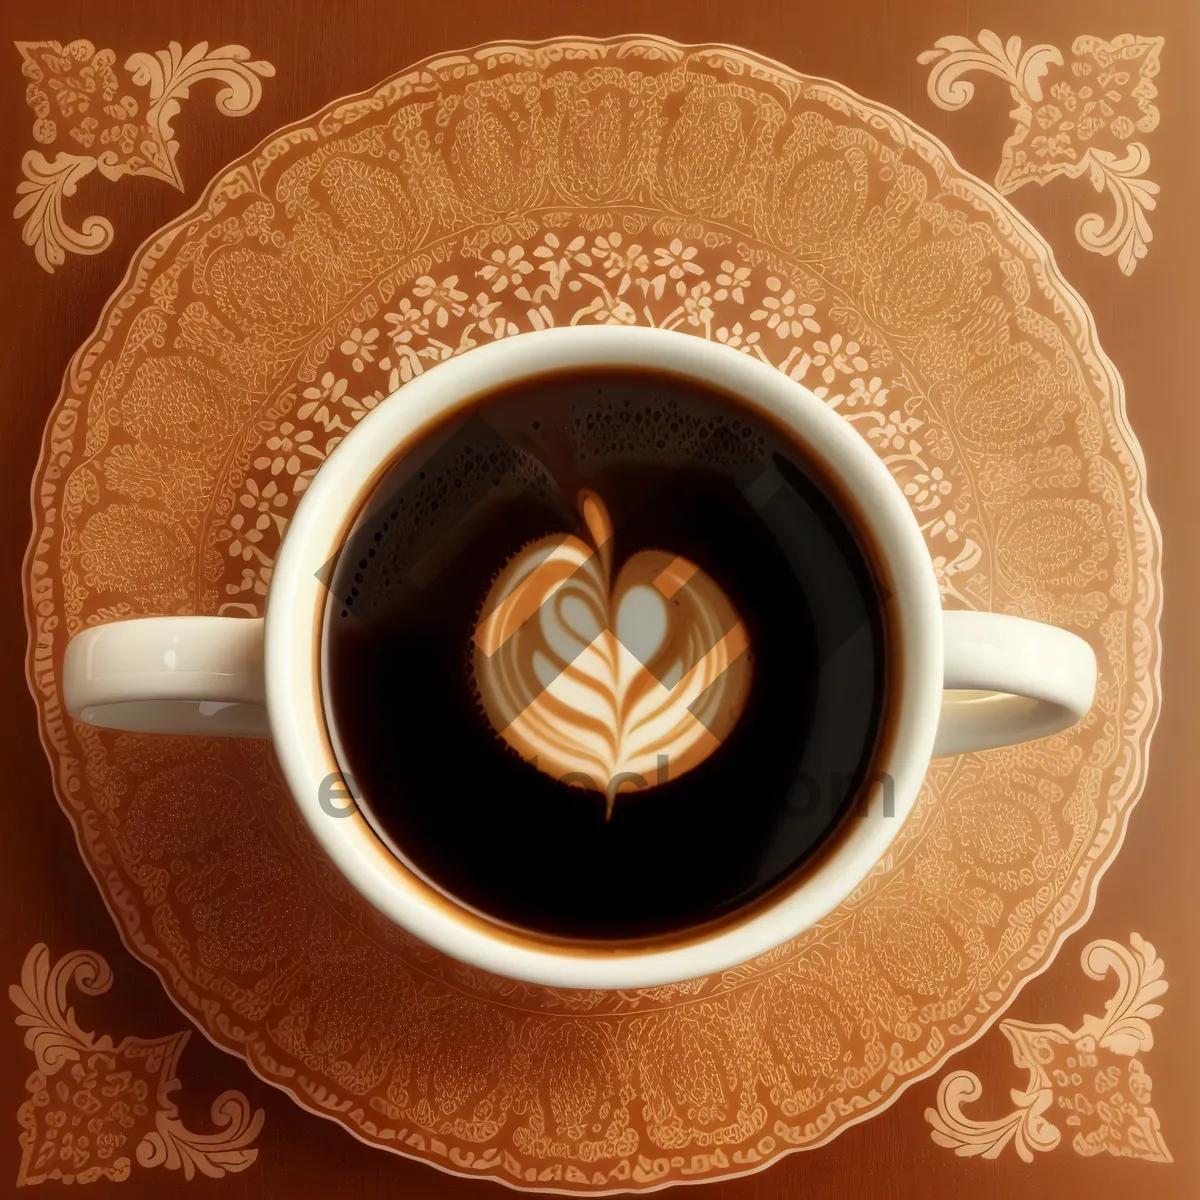 Picture of Morning Coffee Cup on Saucer with Aroma